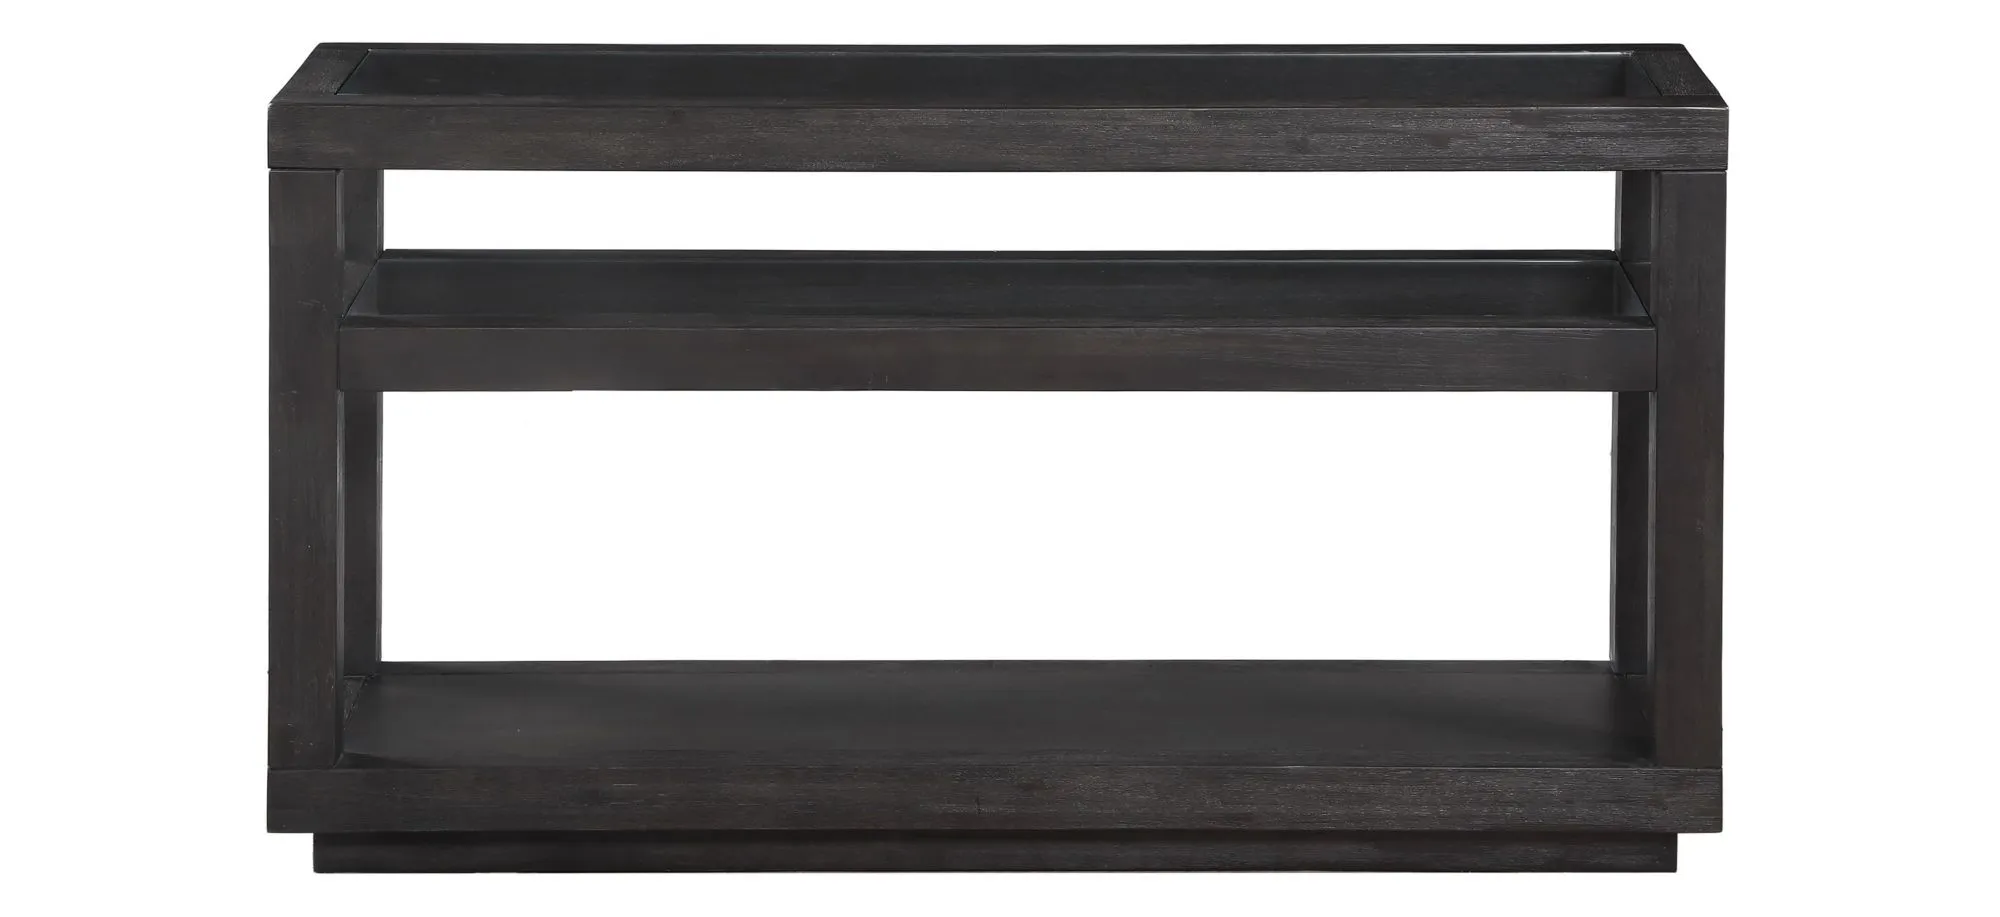 Oxford Oxford Console Table in Black Drifted Oak by Bellanest